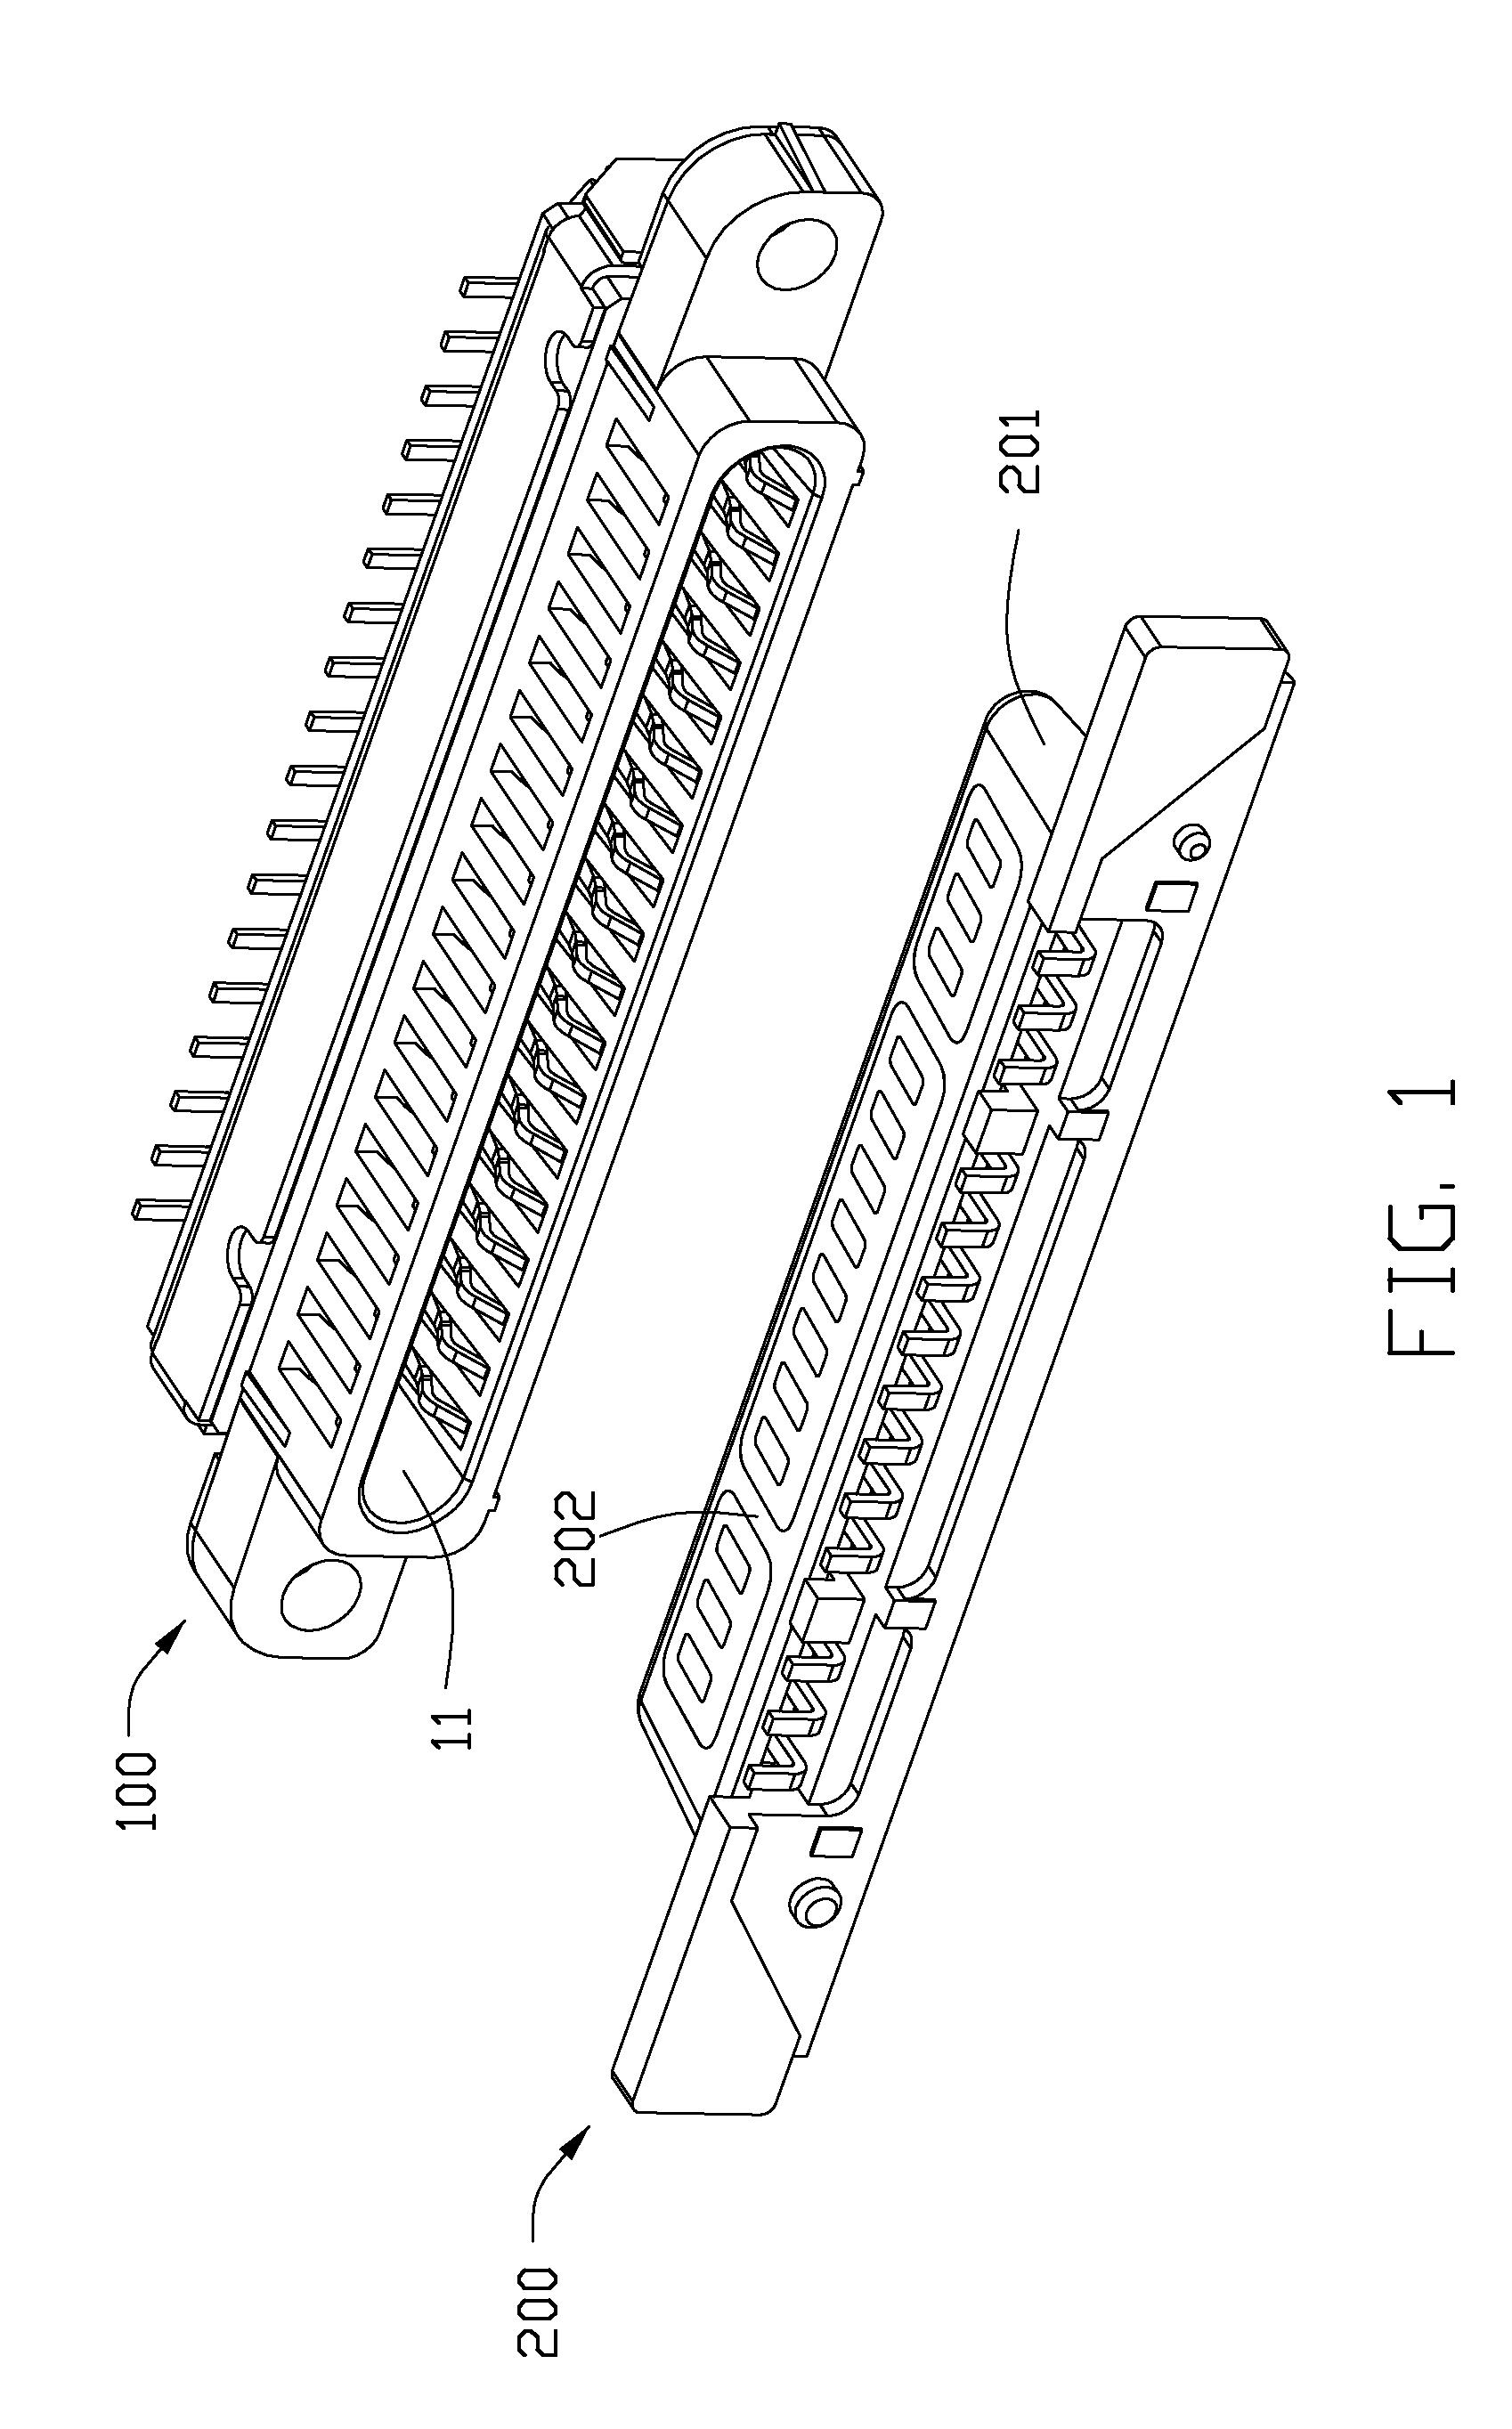 Electrical connector with grounding plate